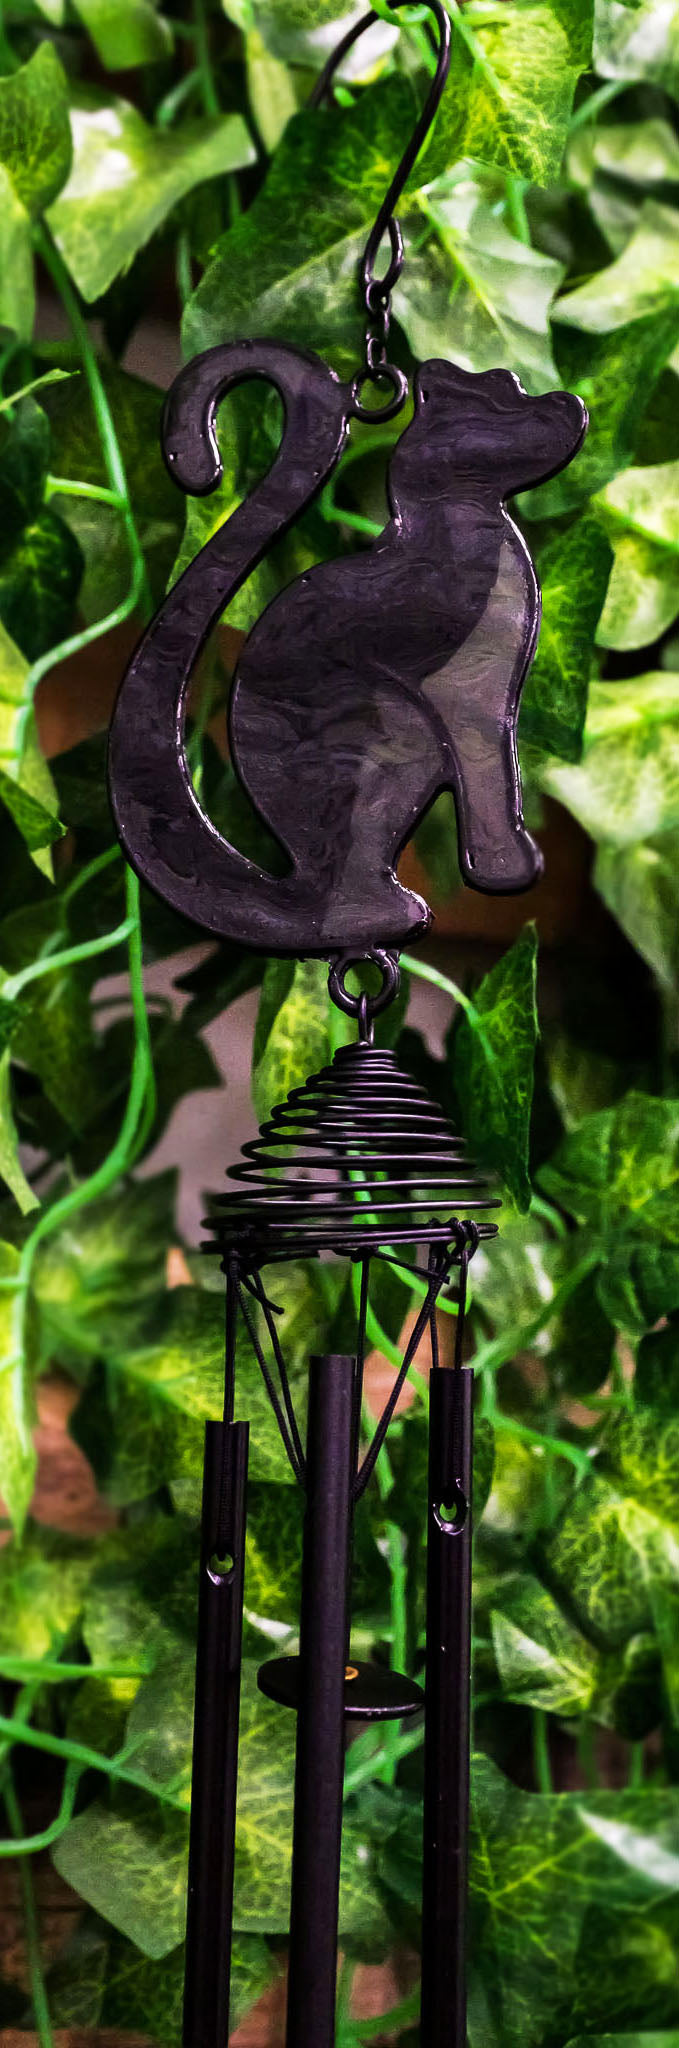 Wicca Witchcraft Black Cat Shadow Profile Stained Glass Wind Chime Suncatcher